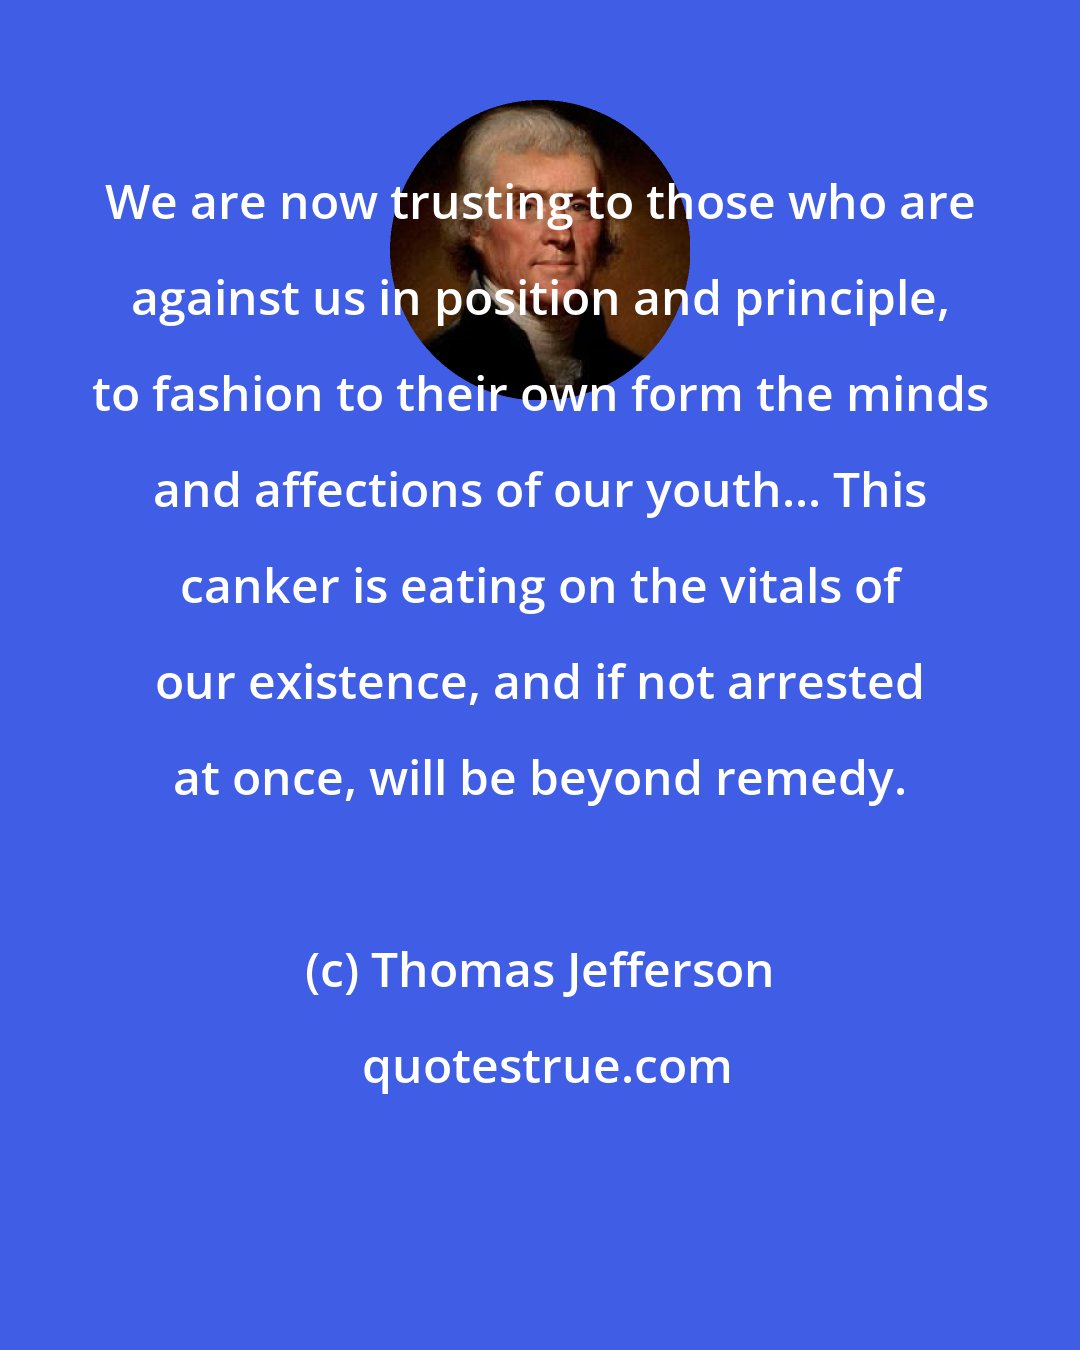 Thomas Jefferson: We are now trusting to those who are against us in position and principle, to fashion to their own form the minds and affections of our youth... This canker is eating on the vitals of our existence, and if not arrested at once, will be beyond remedy.